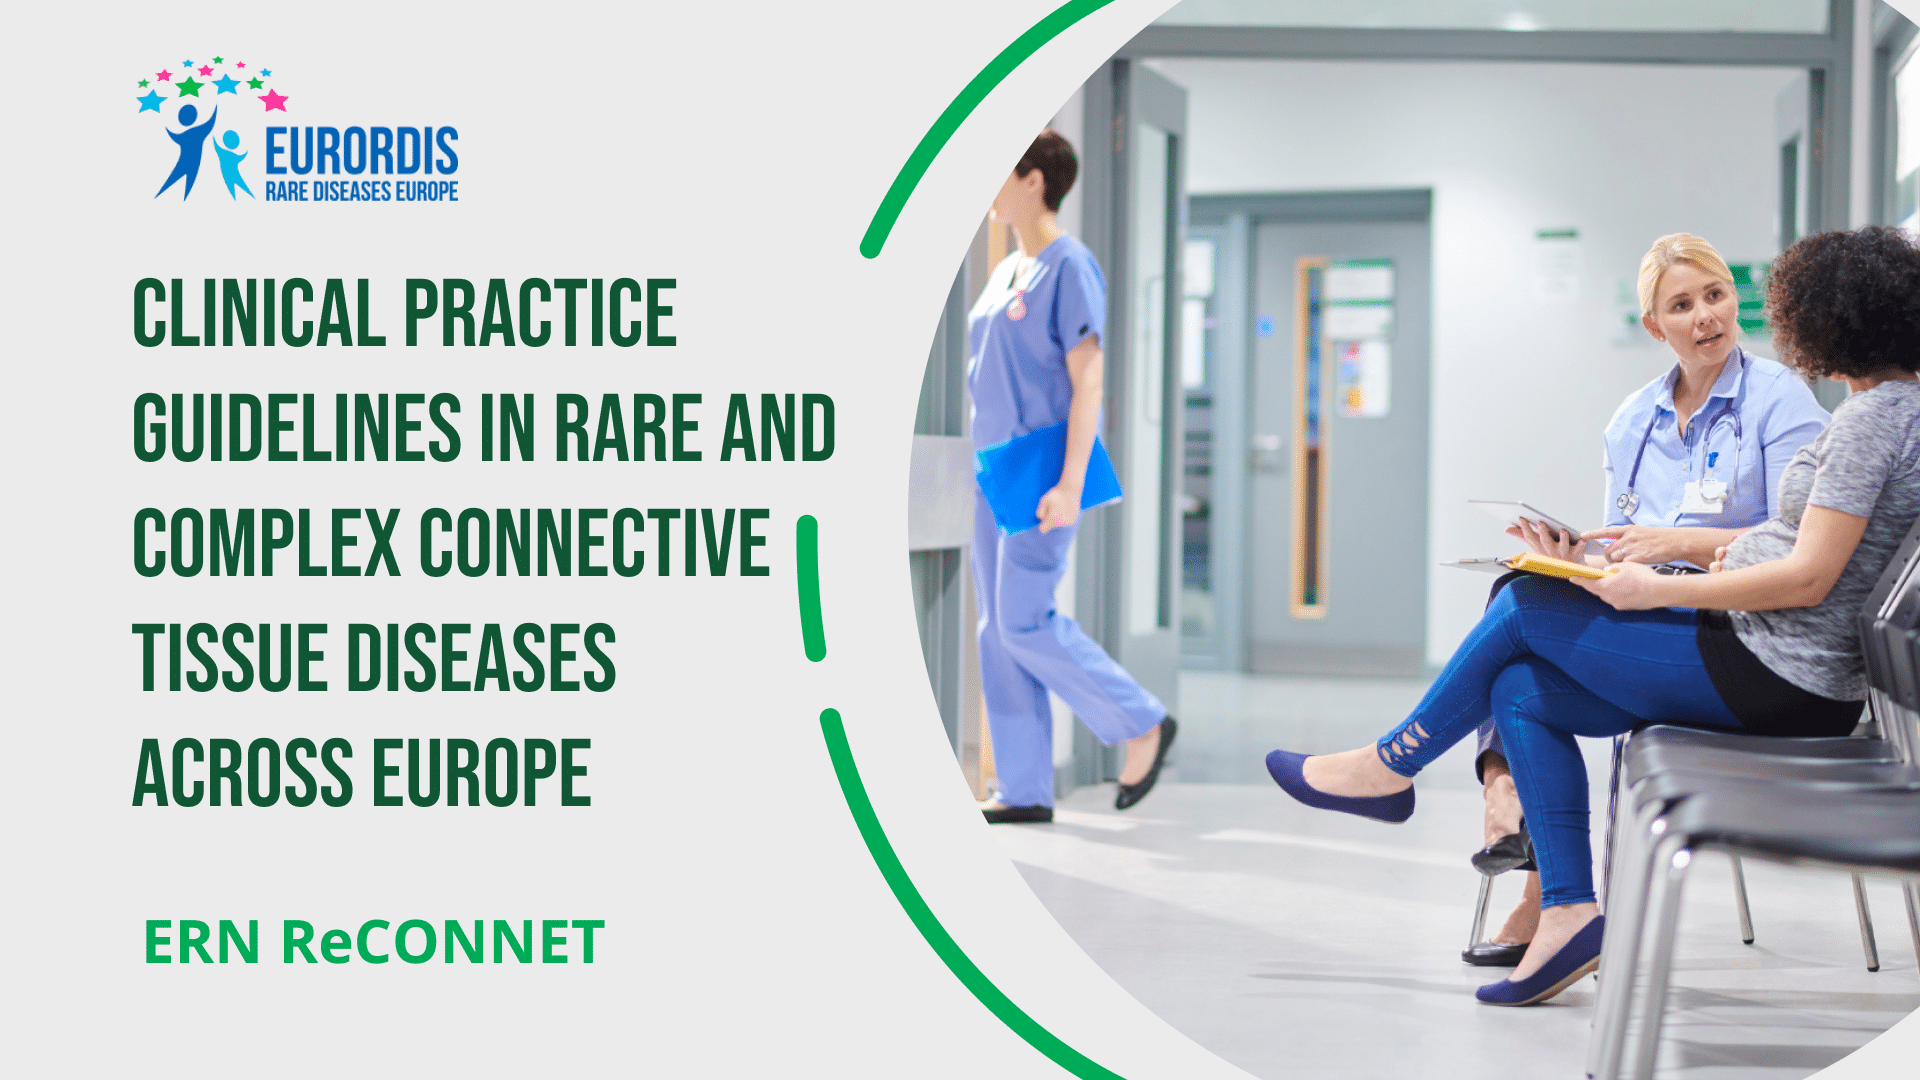 Clinical practice guidelines in rare and complex connective tissue diseases across Europe